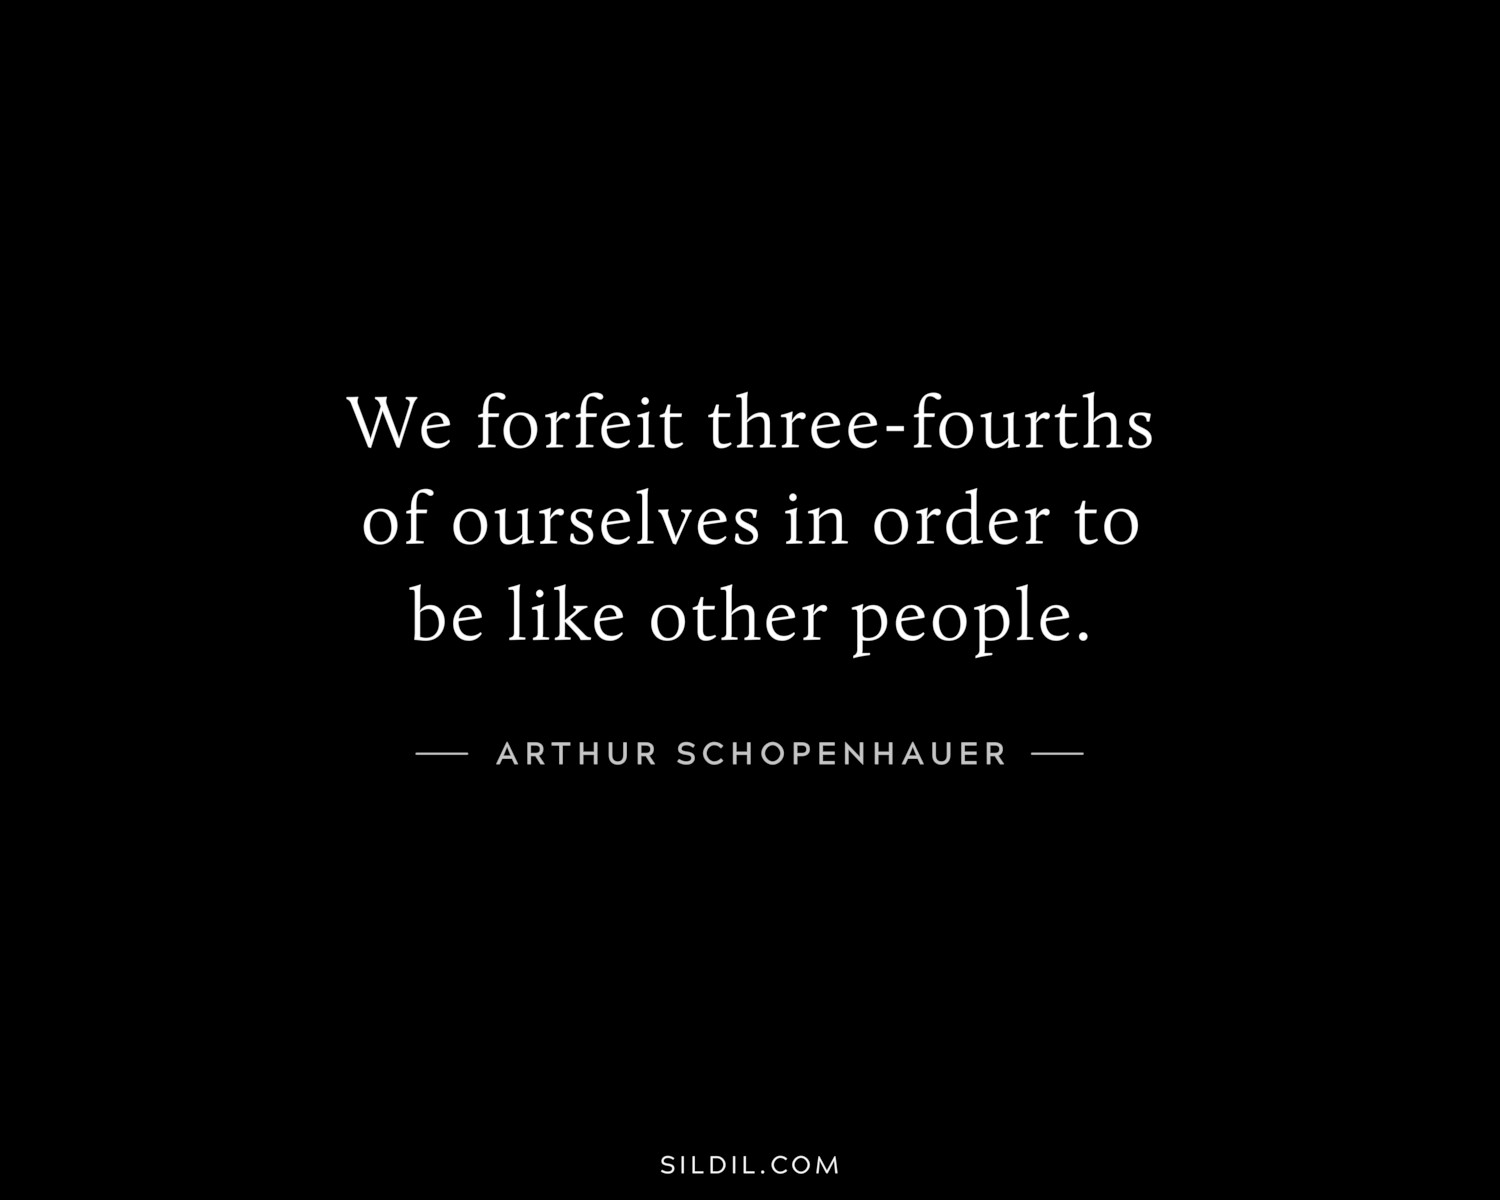 We forfeit three-fourths of ourselves in order to be like other people.